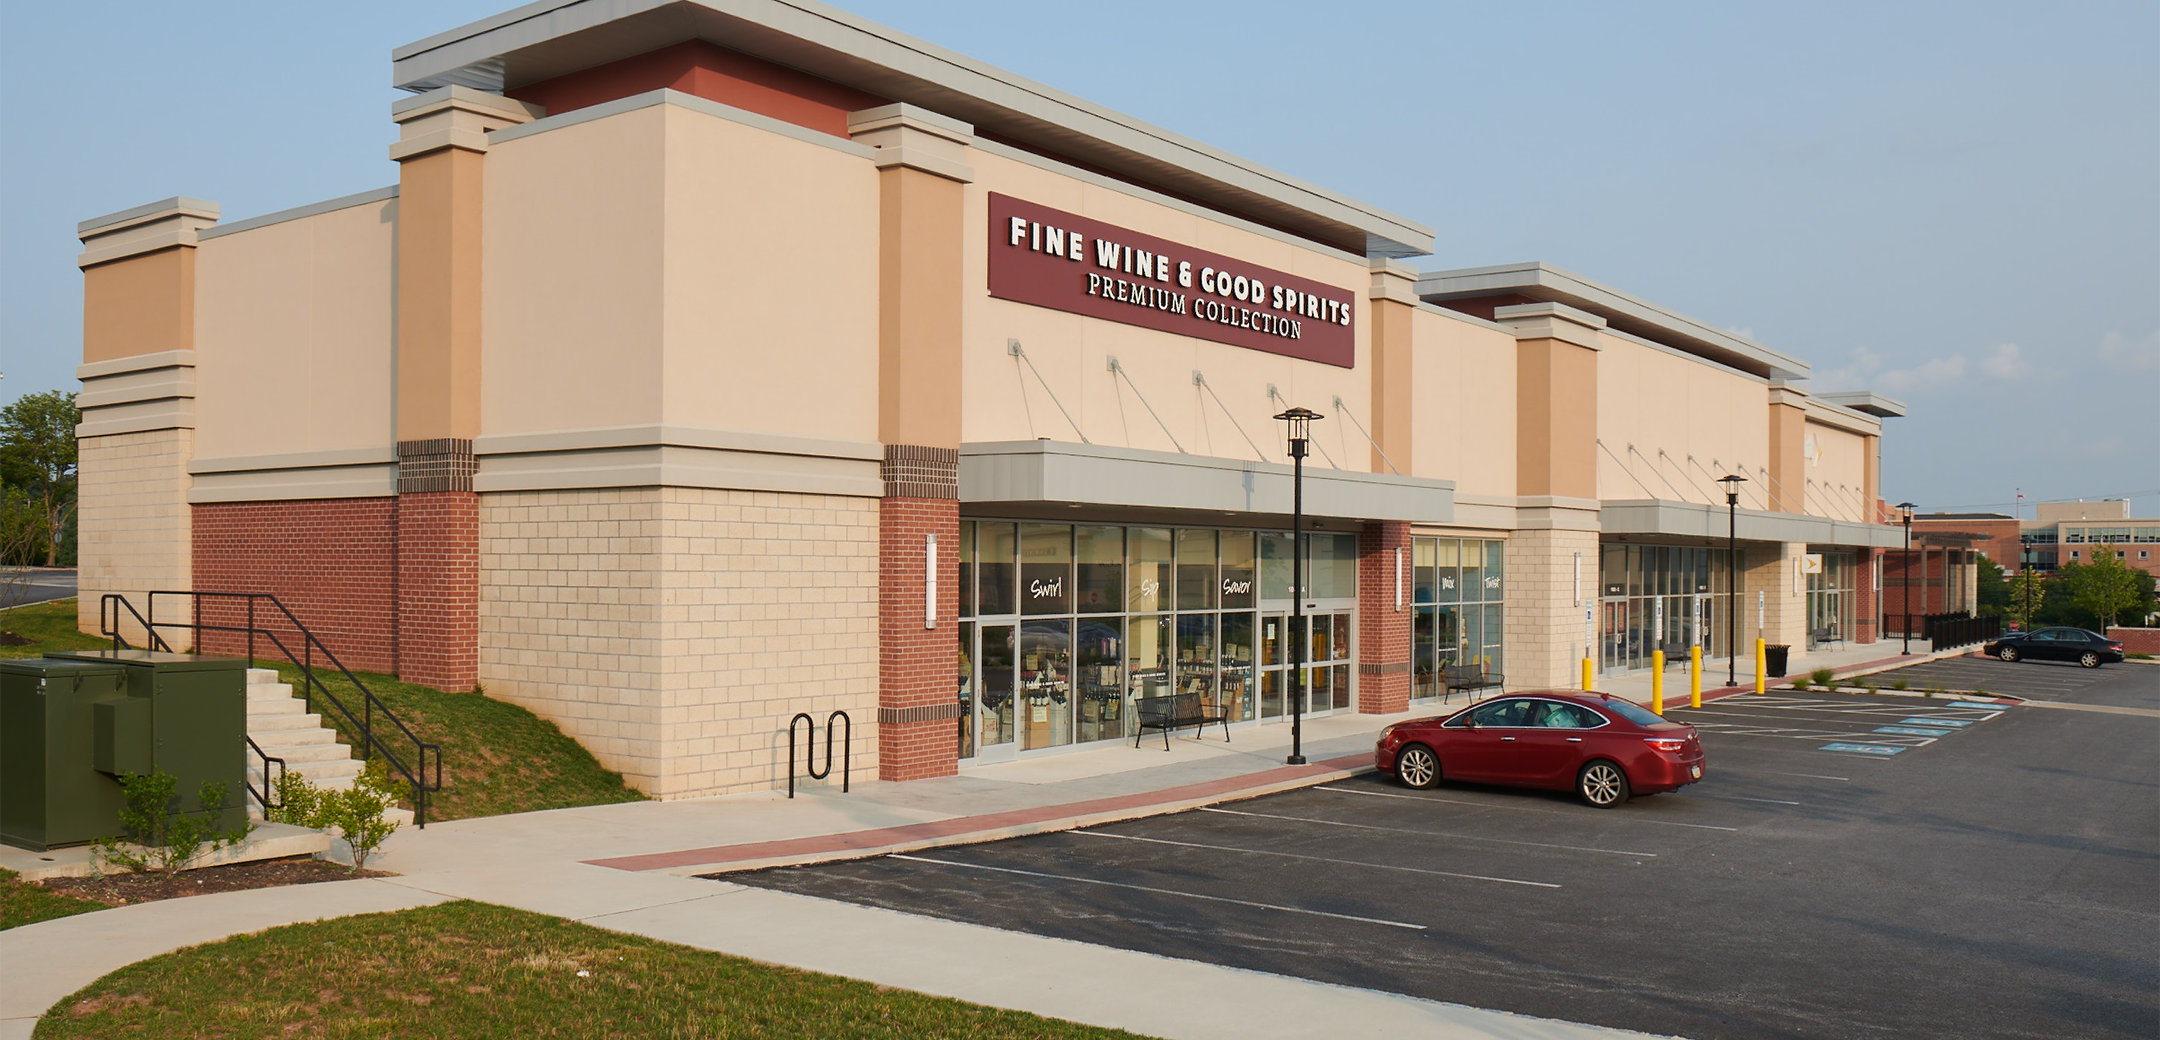 An angled view of the Promenade at Granite Run brick building's side showcasing the glass shopfront, "fine wine & good spirits" signage on top and the side parking lot.